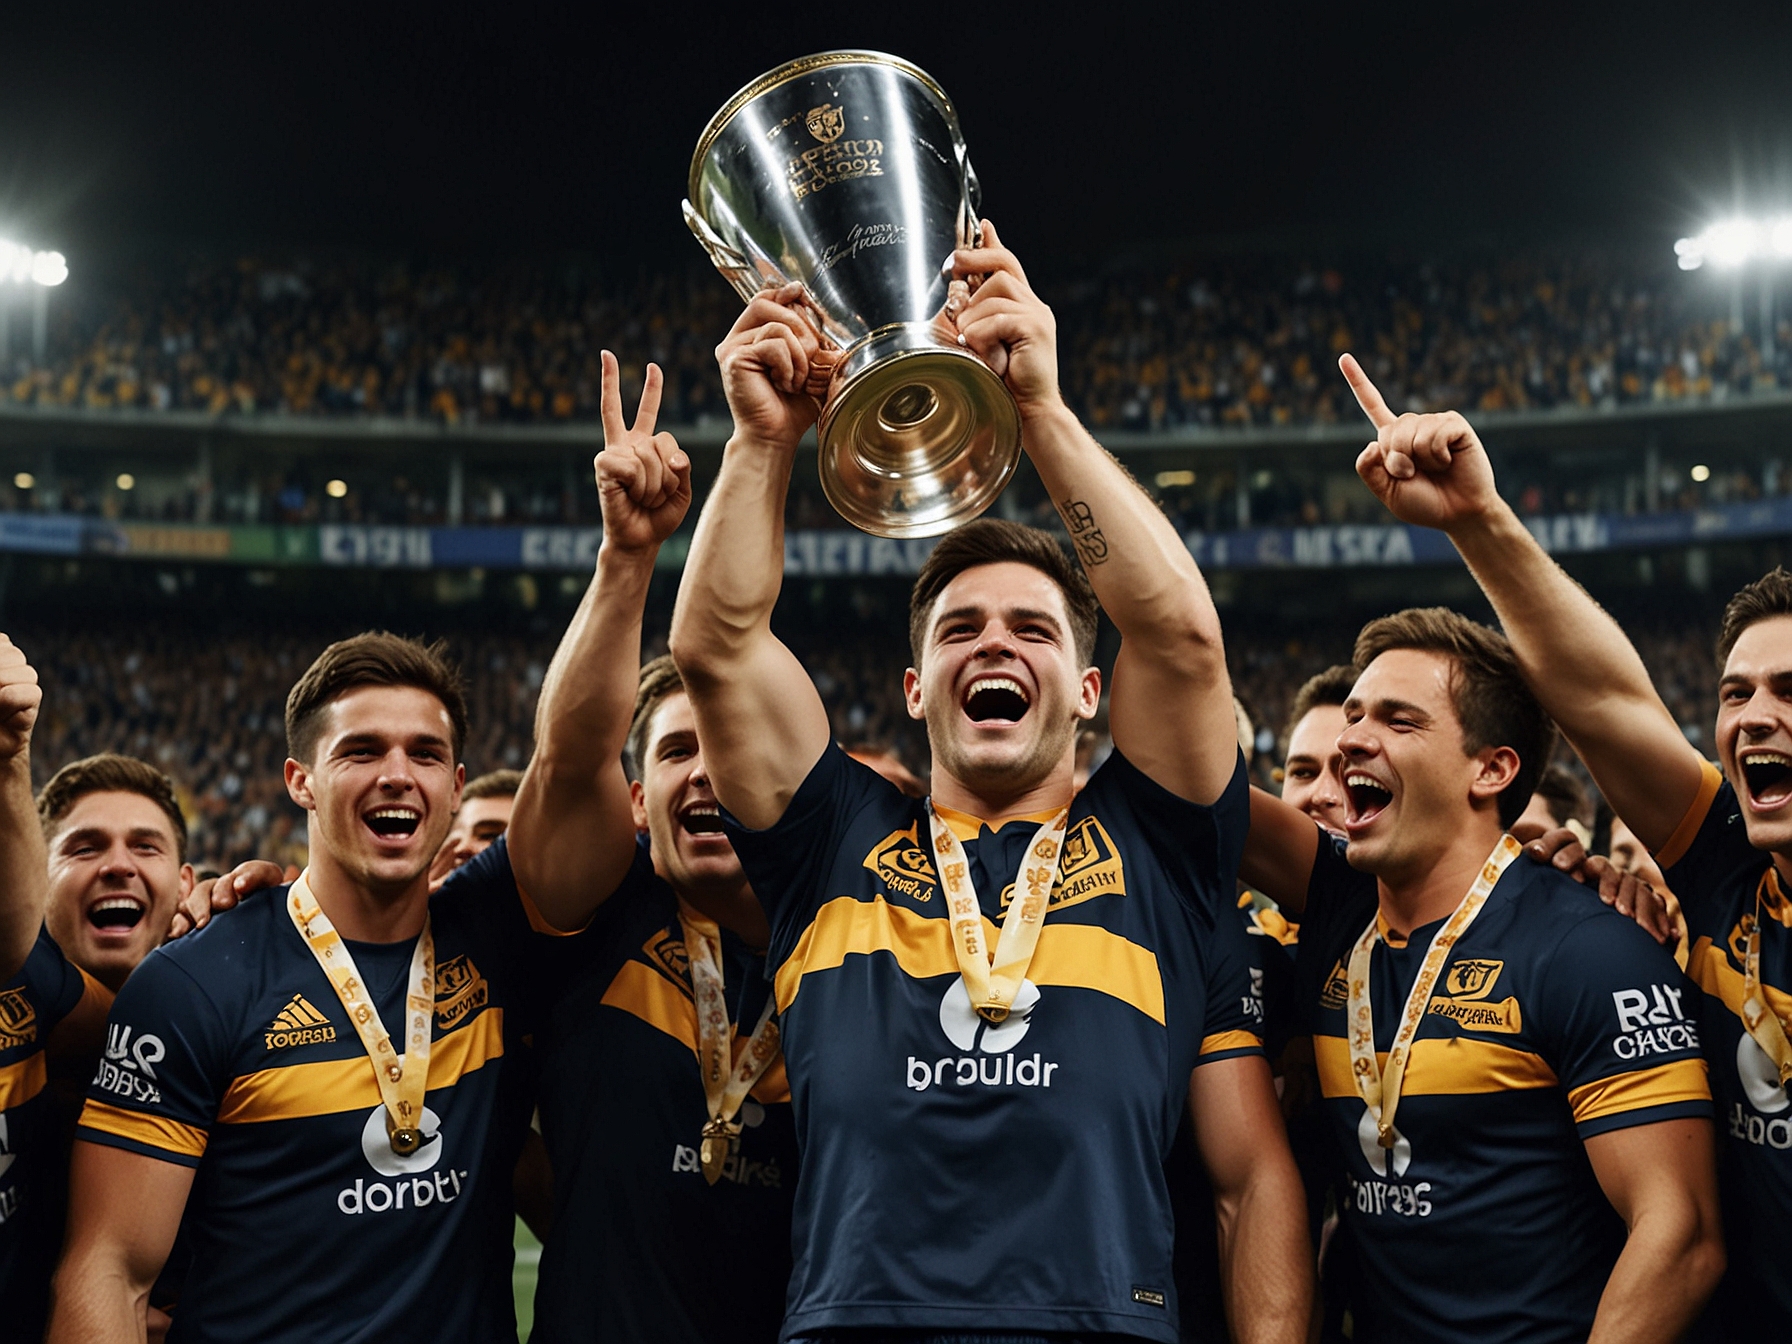 A jubilant Mitchell Moses hoists the Man of the Match trophy amidst cheering teammates and fans. His expression reflects the triumph and emotional culmination of his arduous journey.